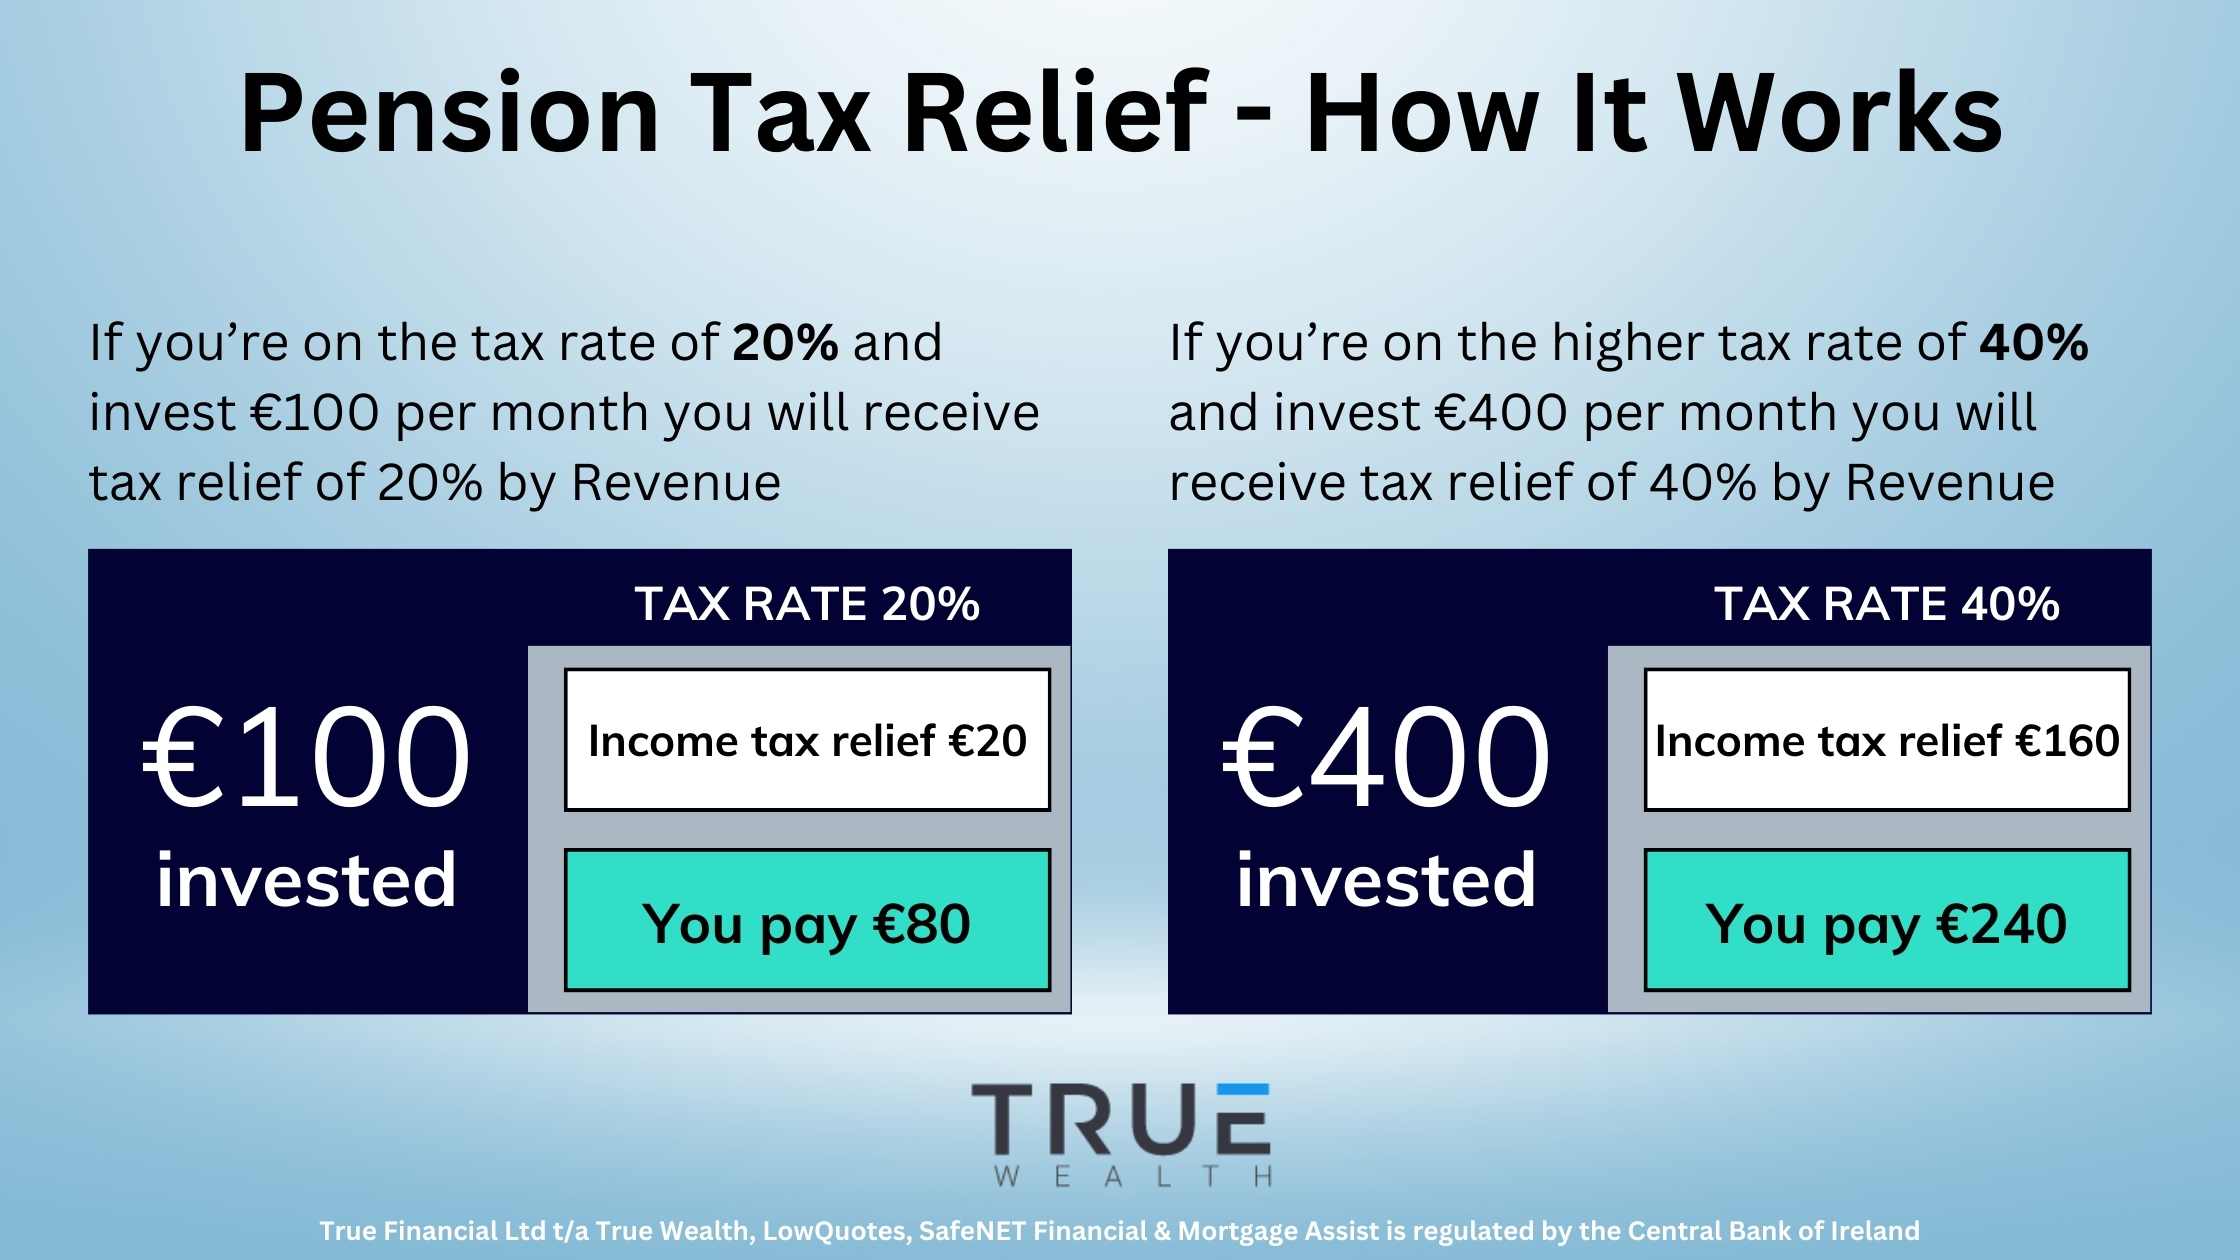 Pension Tax Relief - How it works - True Wealth